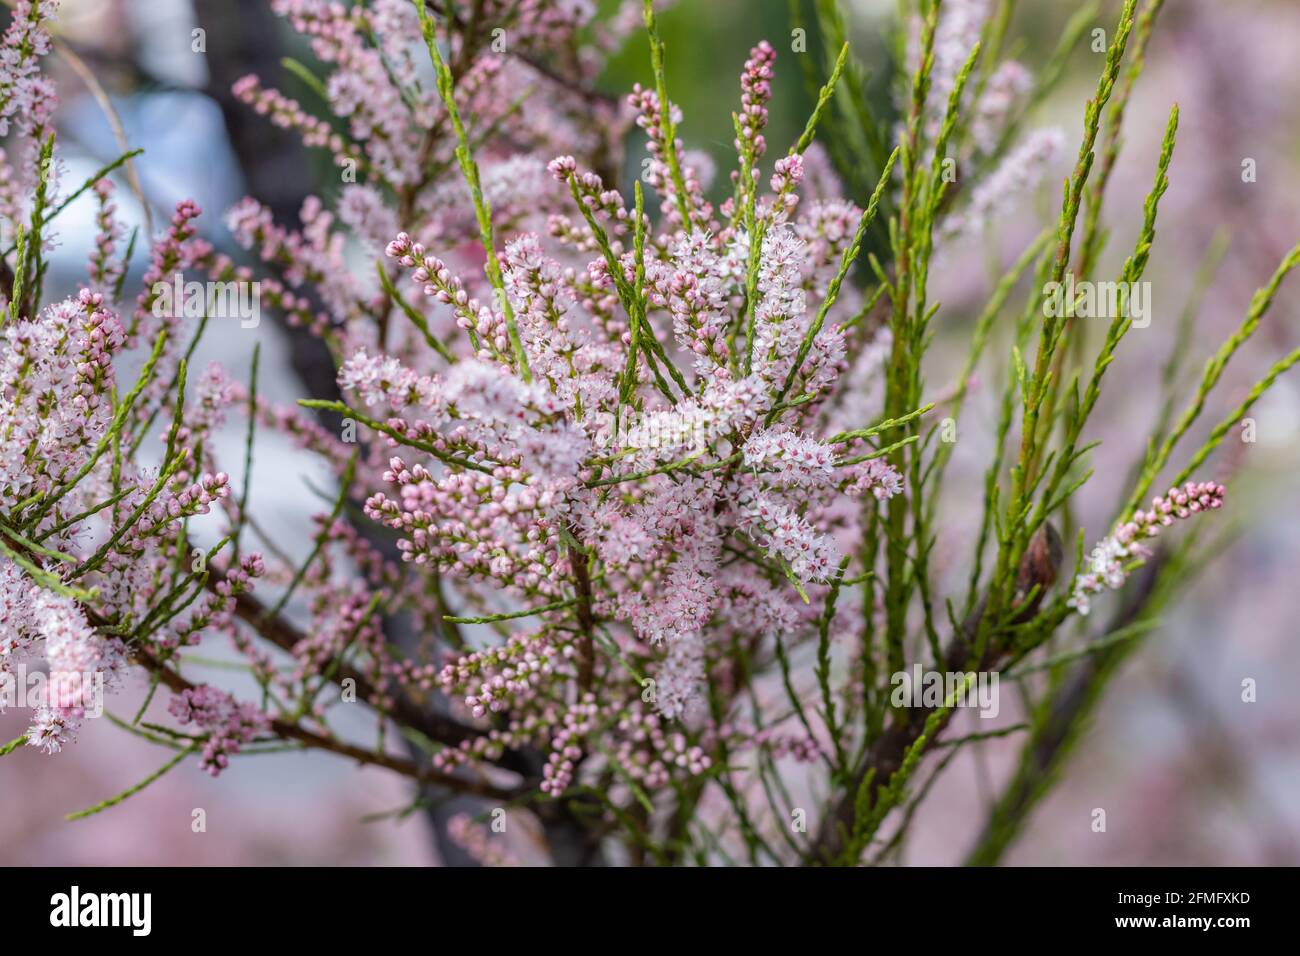 Soft blooming of salt cedar green plant with pink flowers Stock Photo